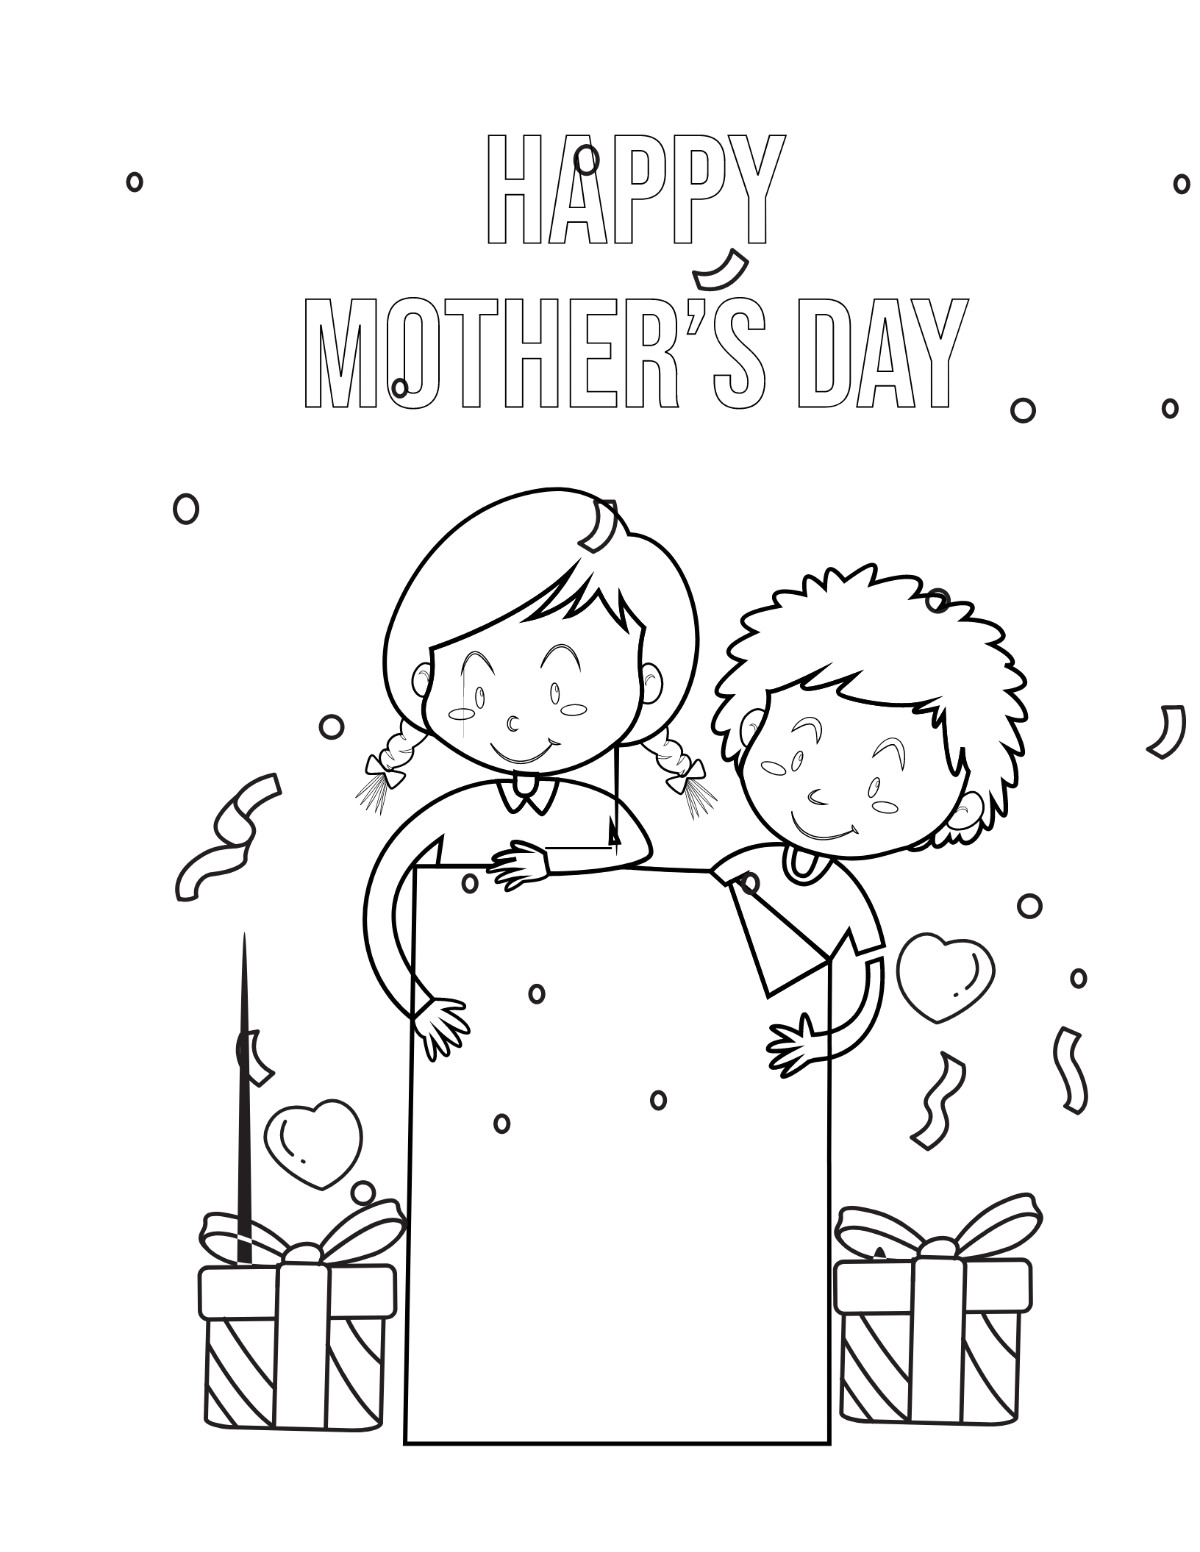 Cute Happpy Mother's Day Coloring Page Template